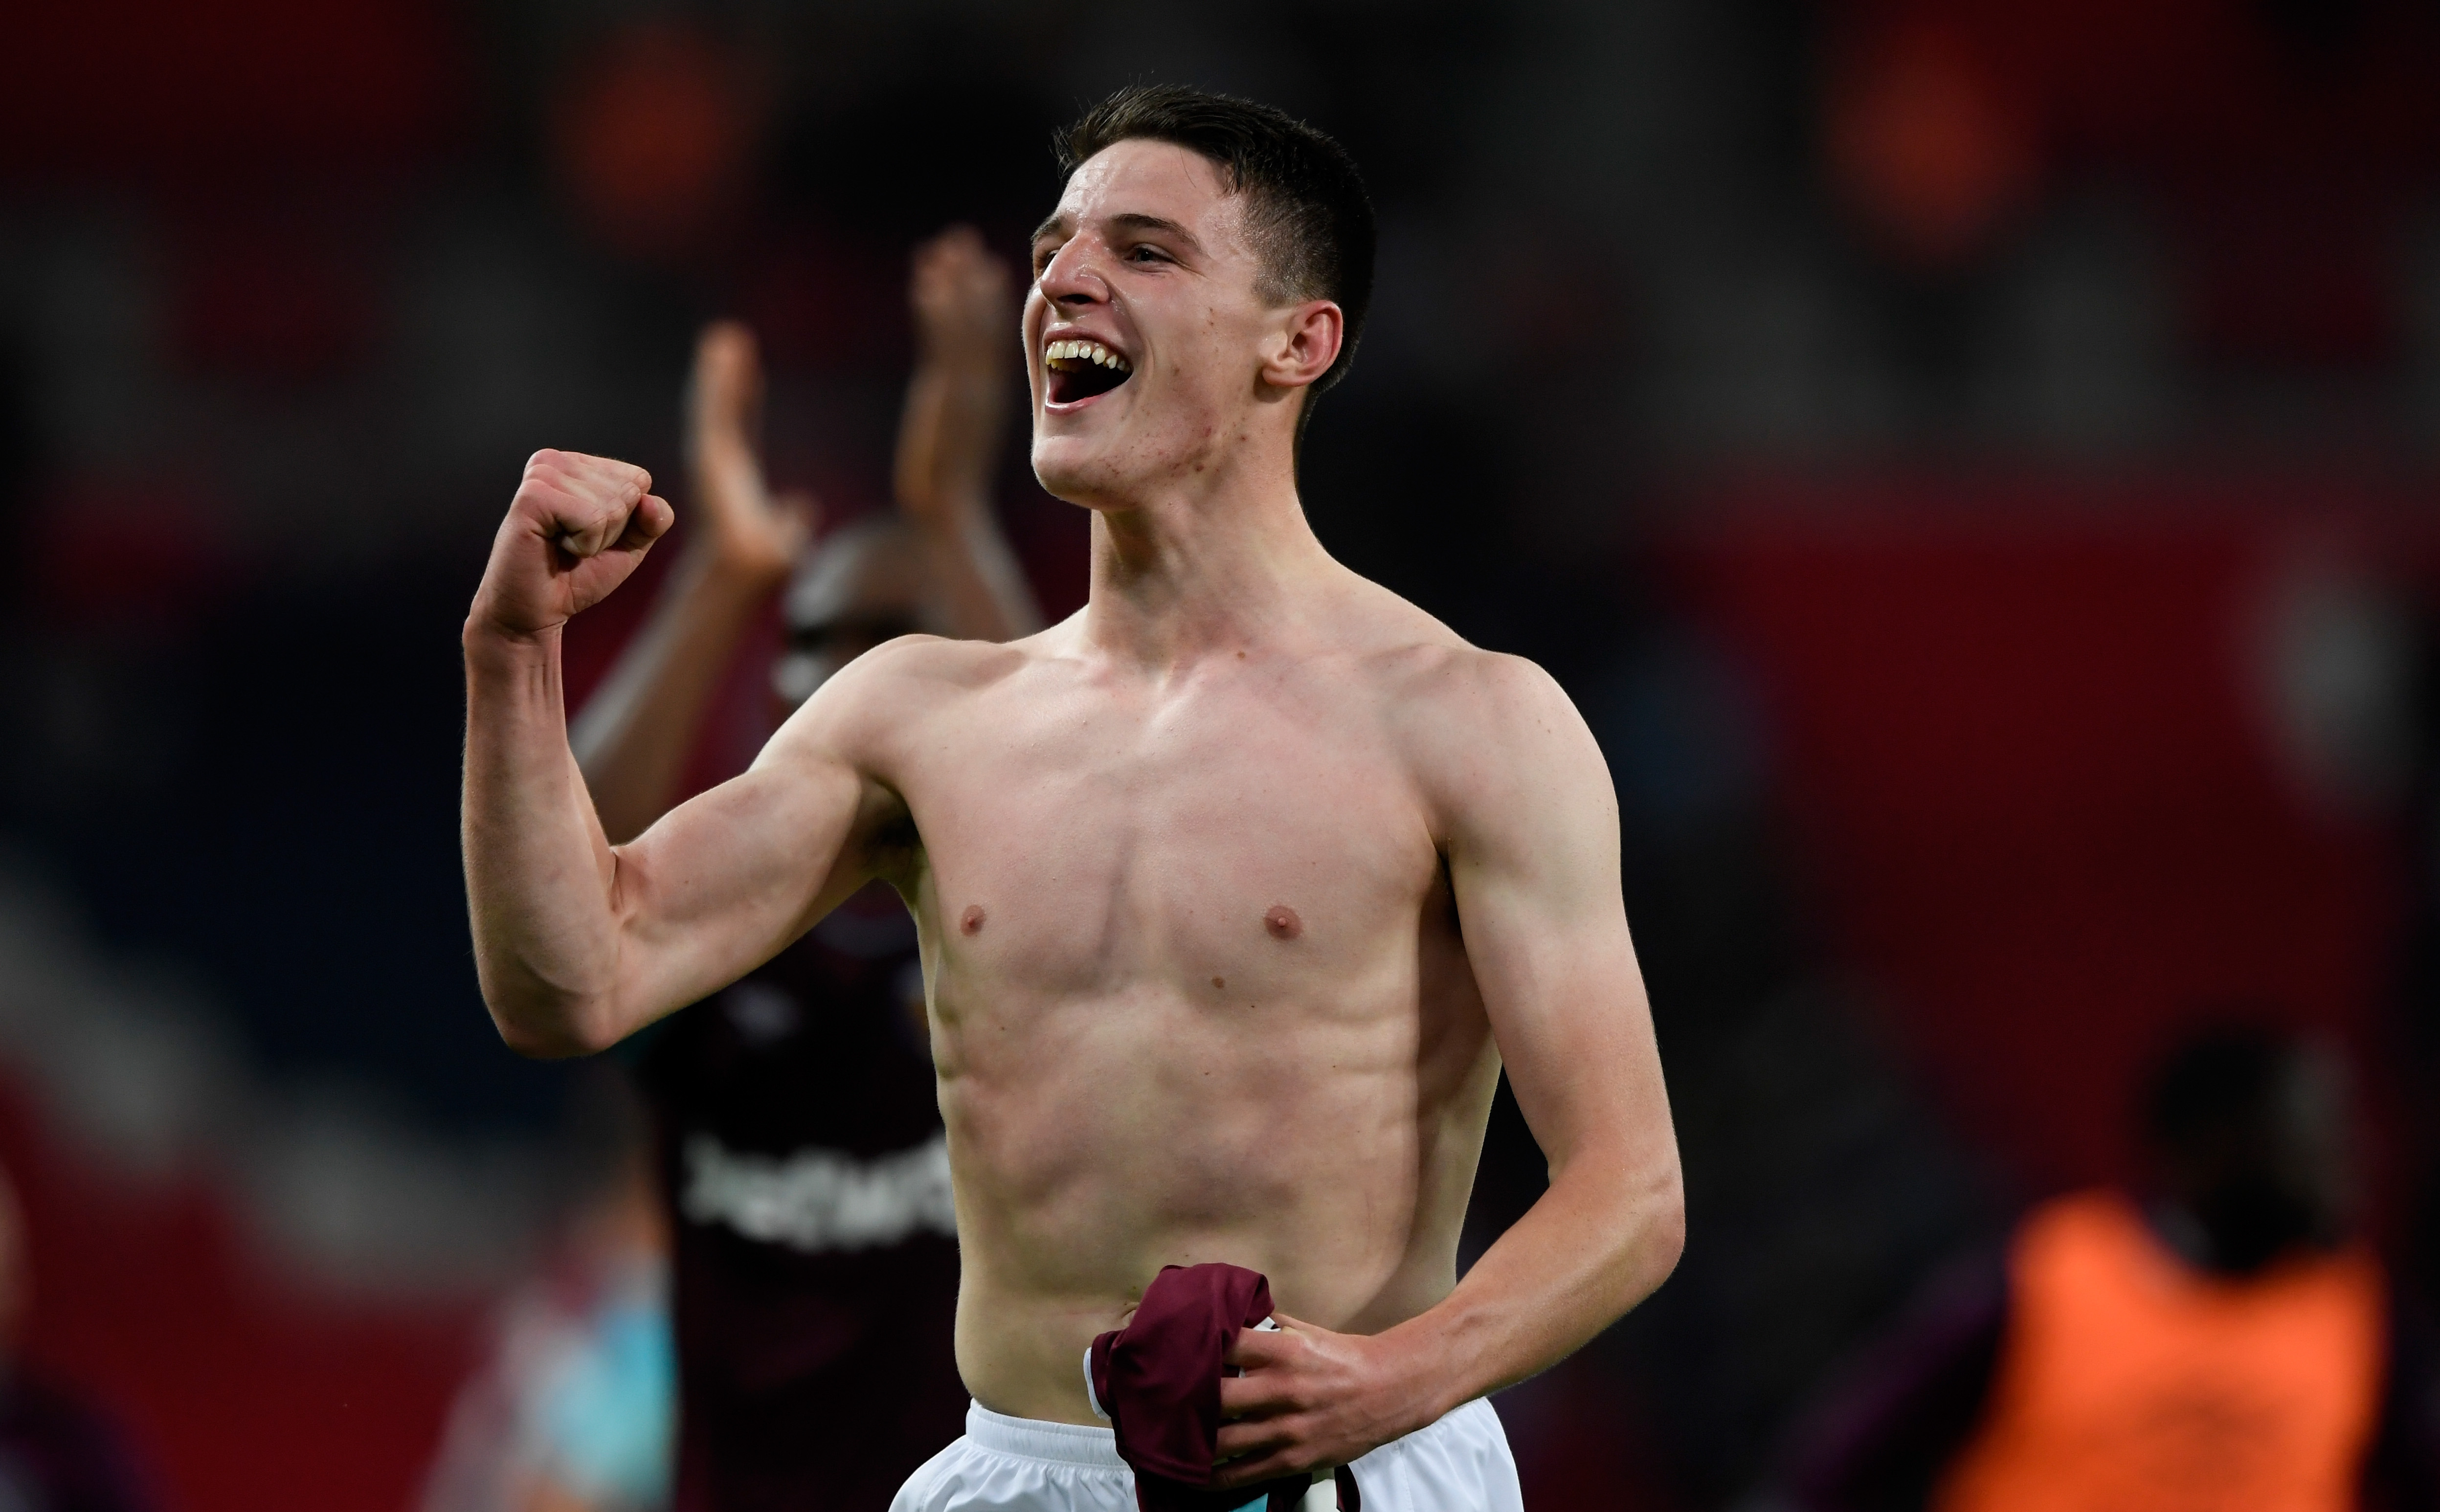 LONDON, ENGLAND - OCTOBER 25:  Declan Rice of West Ham United celebrates his side's win following the Carabao Cup Fourth Round match between Tottenham Hotspur and West Ham United at Wembley Stadium on October 25, 2017 in London, England.  (Photo by Stu Forster/Getty Images)